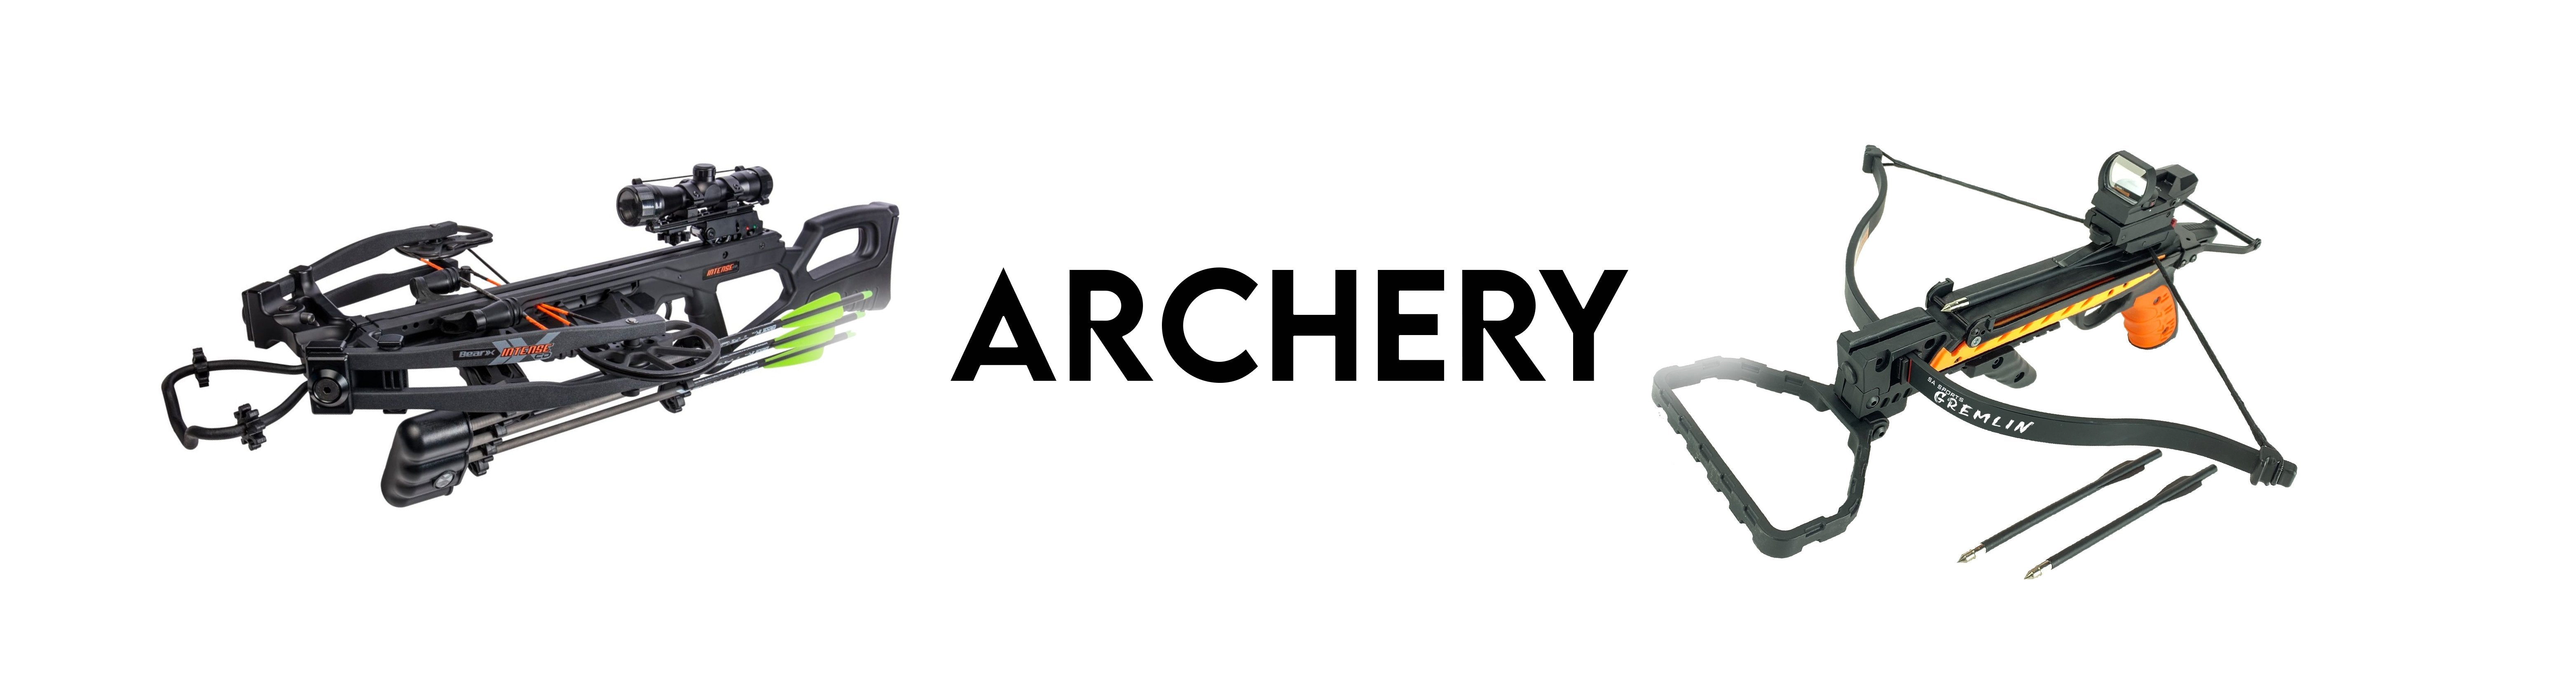 Archery - Recreation Outfitters